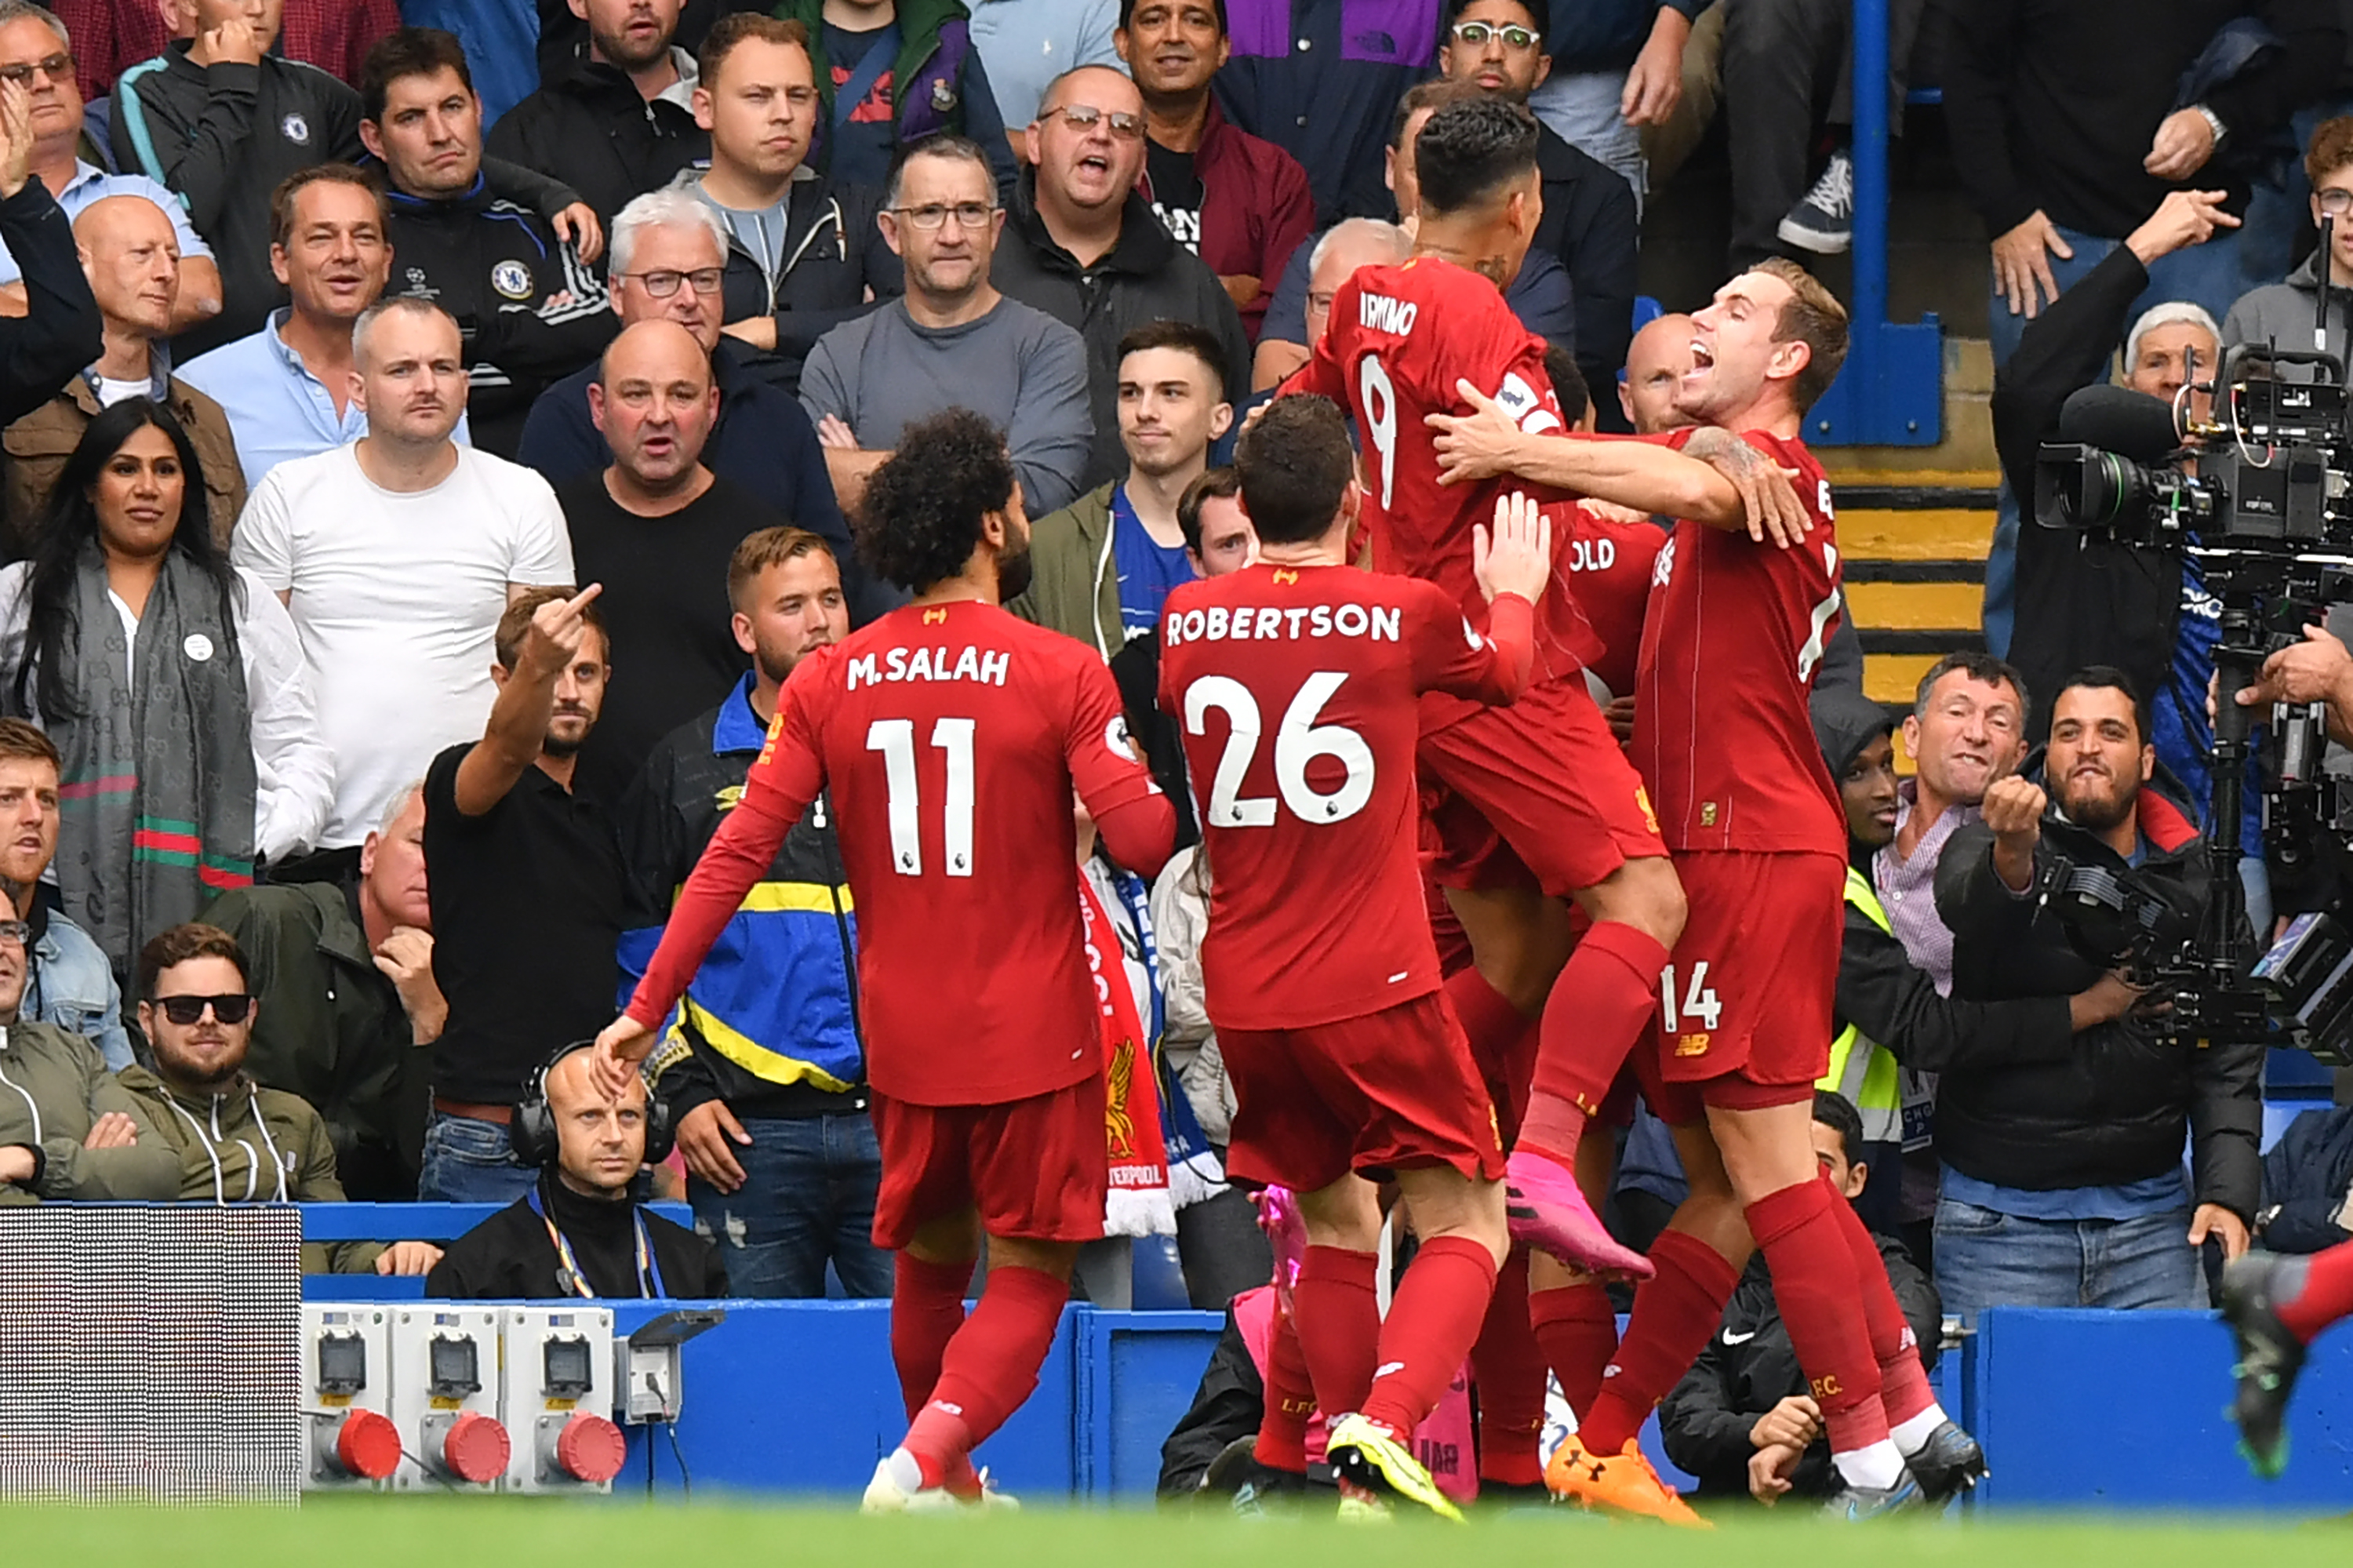 Liverpool players celebrate their first goal during the English Premier League football match between Chelsea and Liverpool at Stamford Bridge in London on September 22, 2019. (Photo by OLLY GREENWOOD / AFP) / RESTRICTED TO EDITORIAL USE. No use with unauthorized audio, video, data, fixture lists, club/league logos or 'live' services. Online in-match use limited to 120 images. An additional 40 images may be used in extra time. No video emulation. Social media in-match use limited to 120 images. An additional 40 images may be used in extra time. No use in betting publications, games or single club/league/player publications. /         (Photo credit should read OLLY GREENWOOD/AFP/Getty Images)